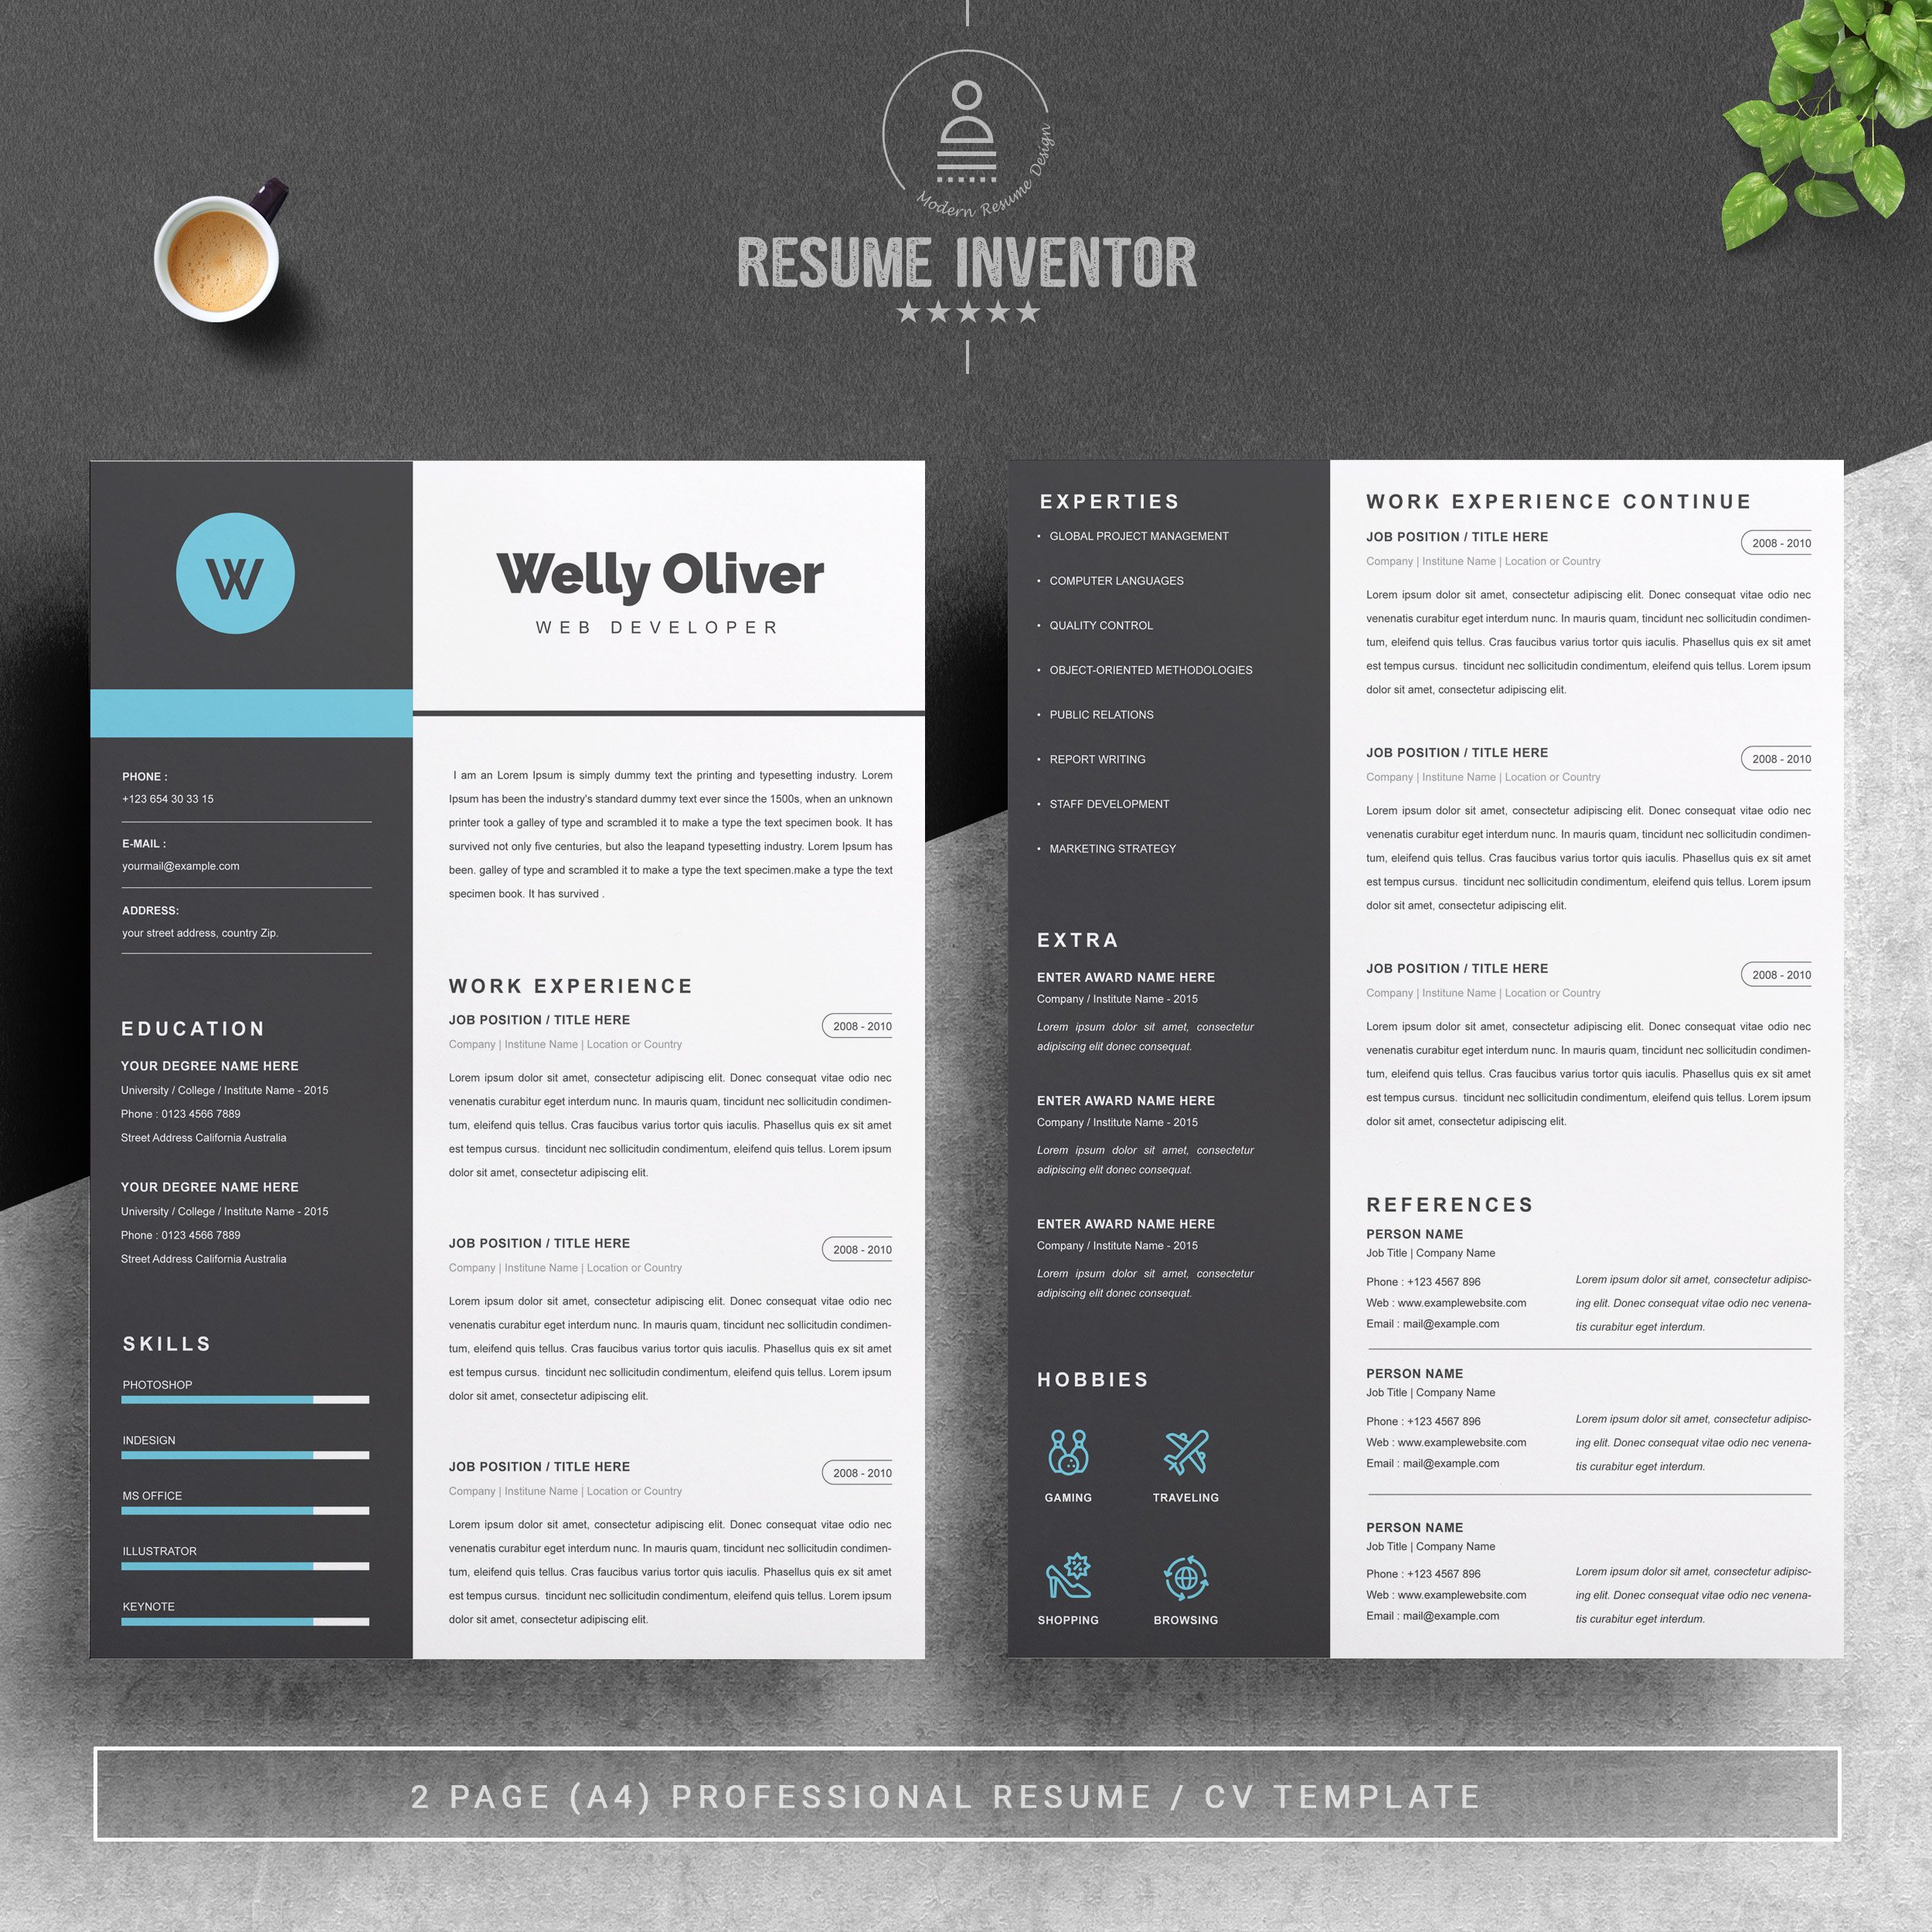 Word CV Template | Resume Template preview image.